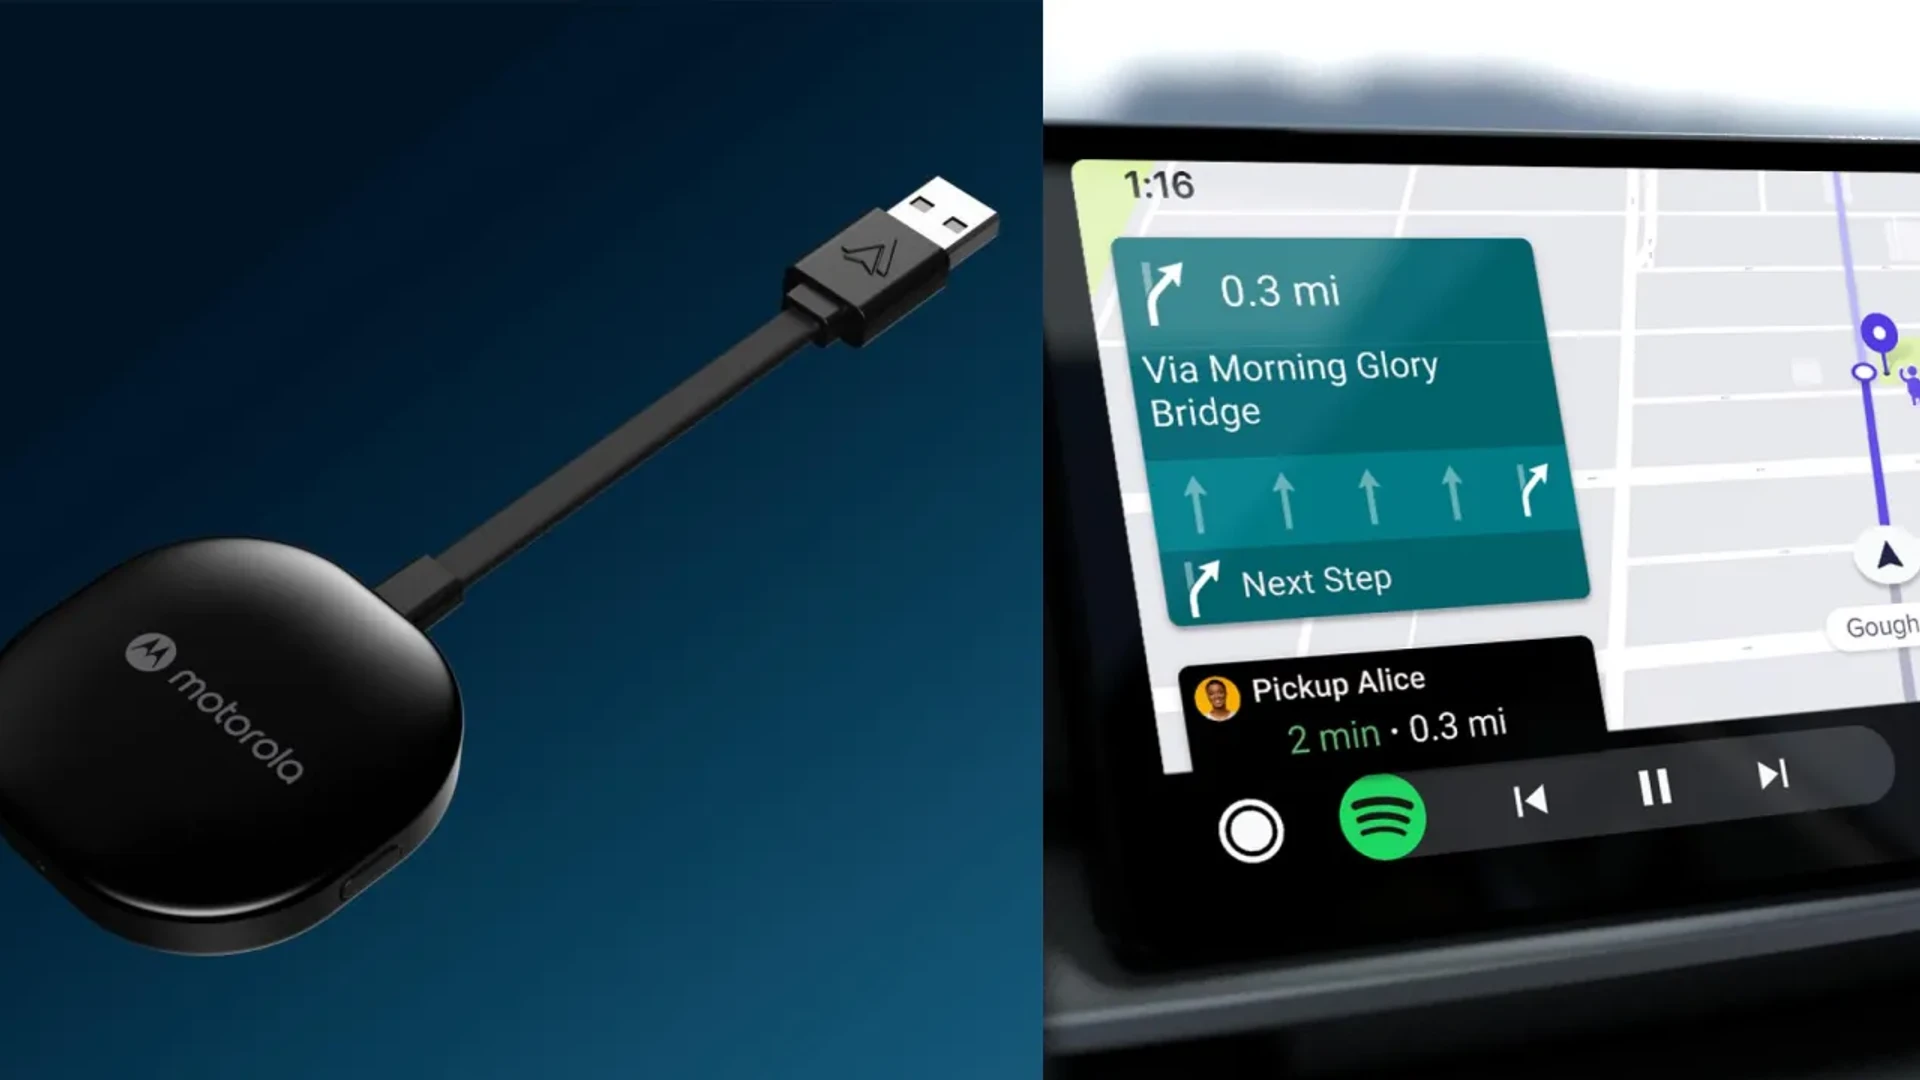 The Motorola MA1 Adapter brings Android Auto to more Cars for $90